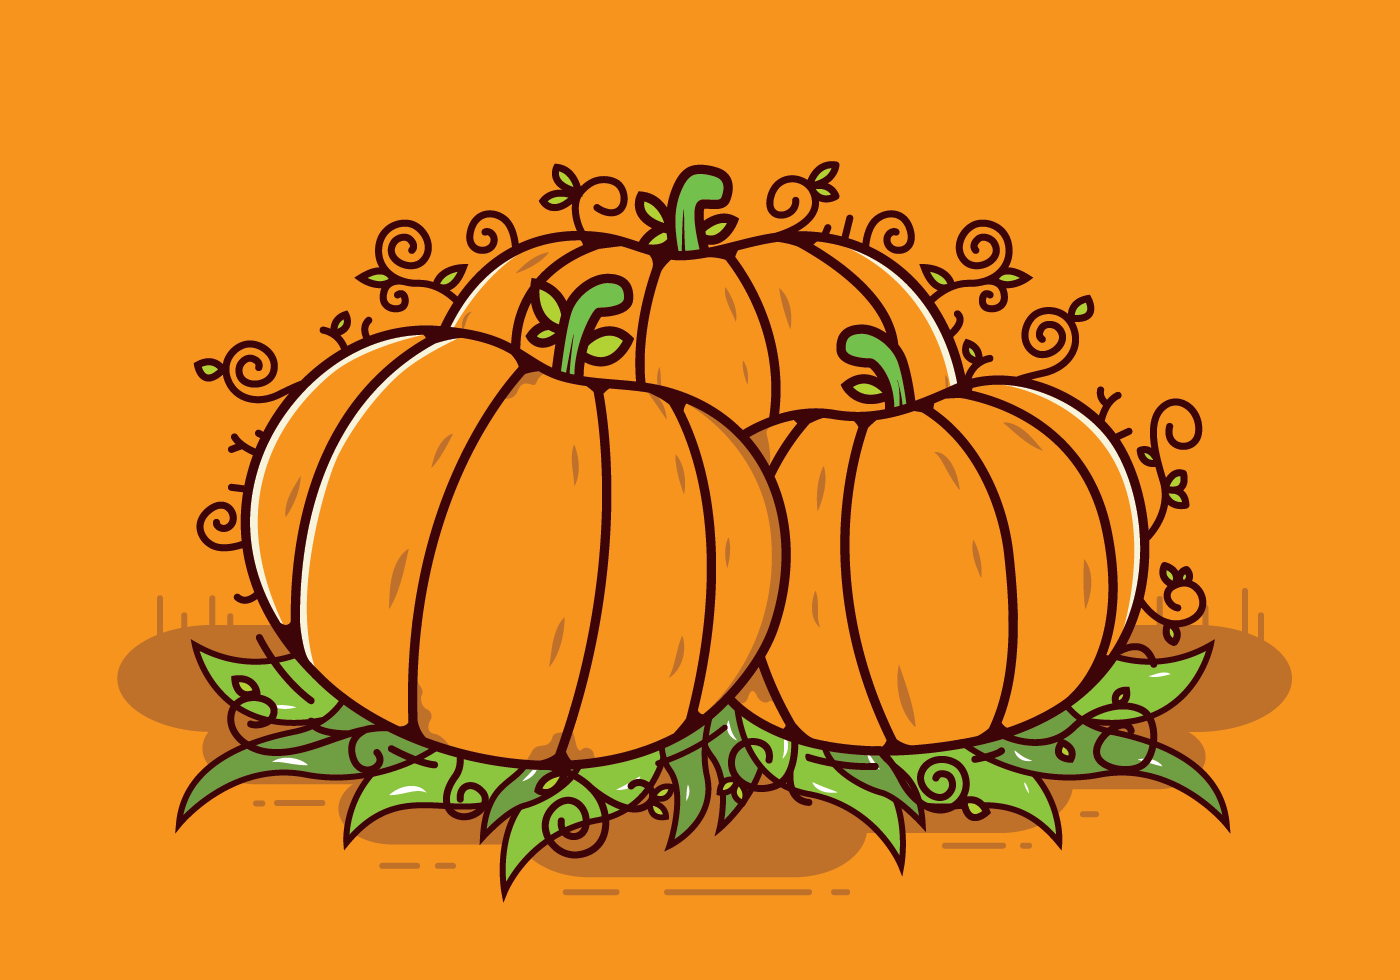 Browse 382 incredible Pumpkin Patch vectors, icons, clipart graphics, and b...